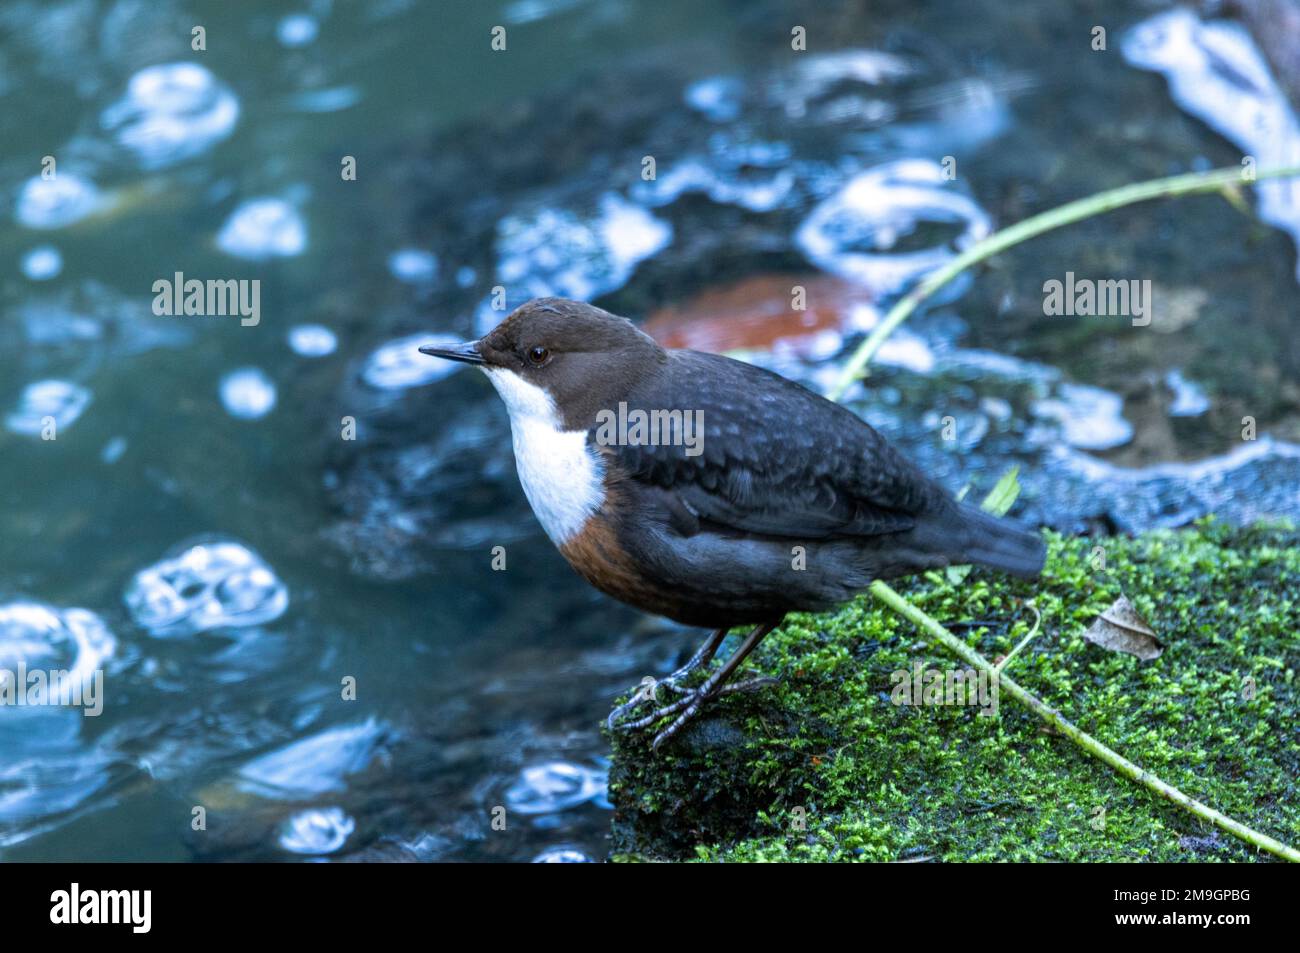 A Dipper stands on the bank of a clear water stream. This active bird is associated with fast flowing streams and rivers usually in upland areas. Stock Photo